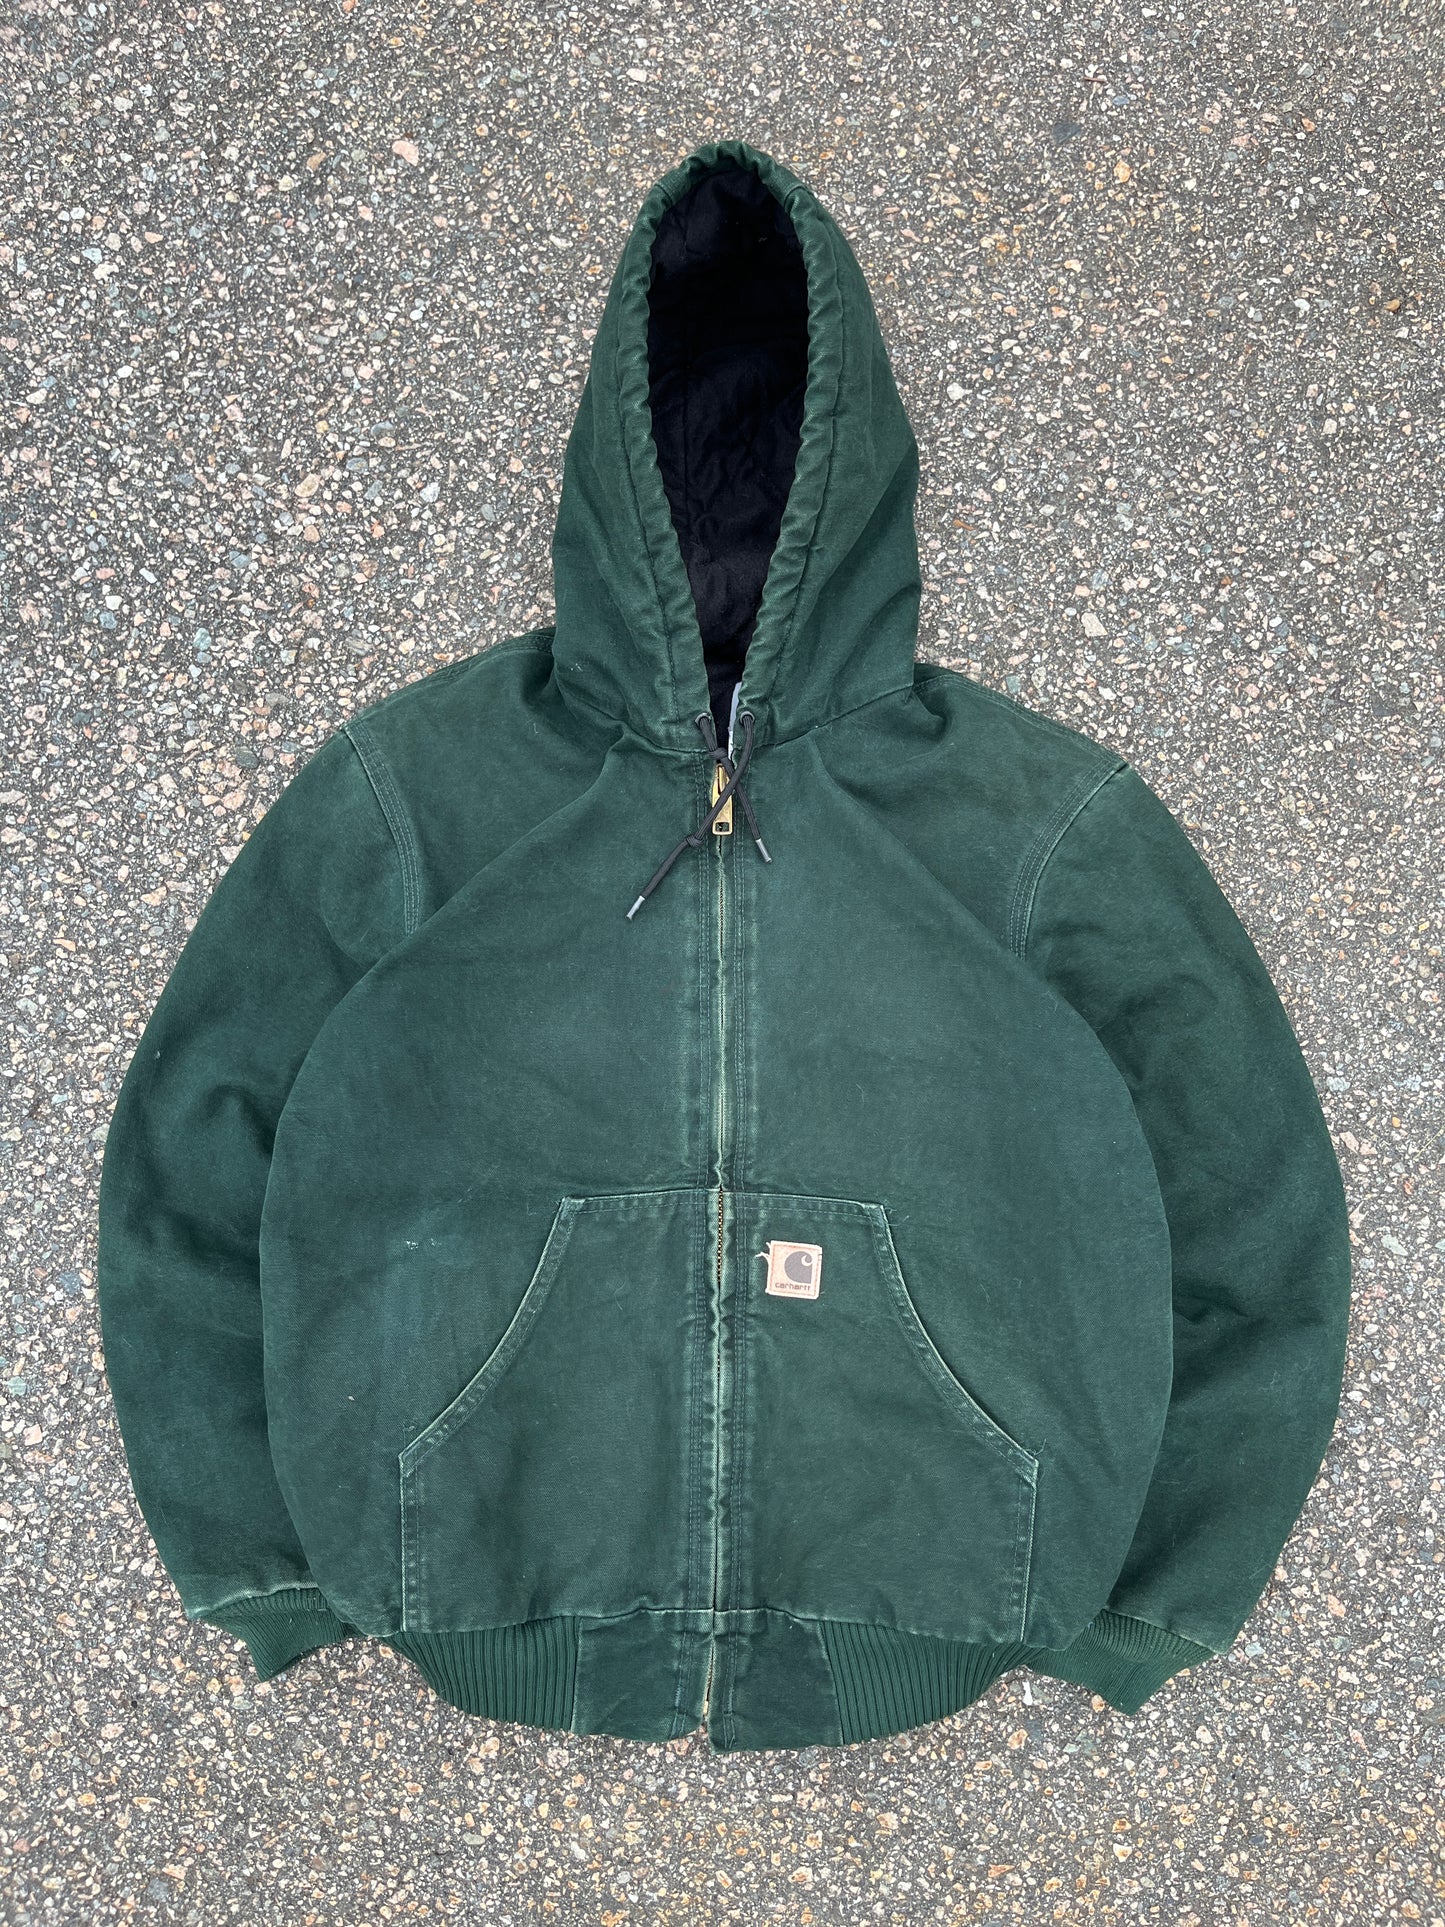 Faded Spruce Green Carhartt Active Jacket - Small